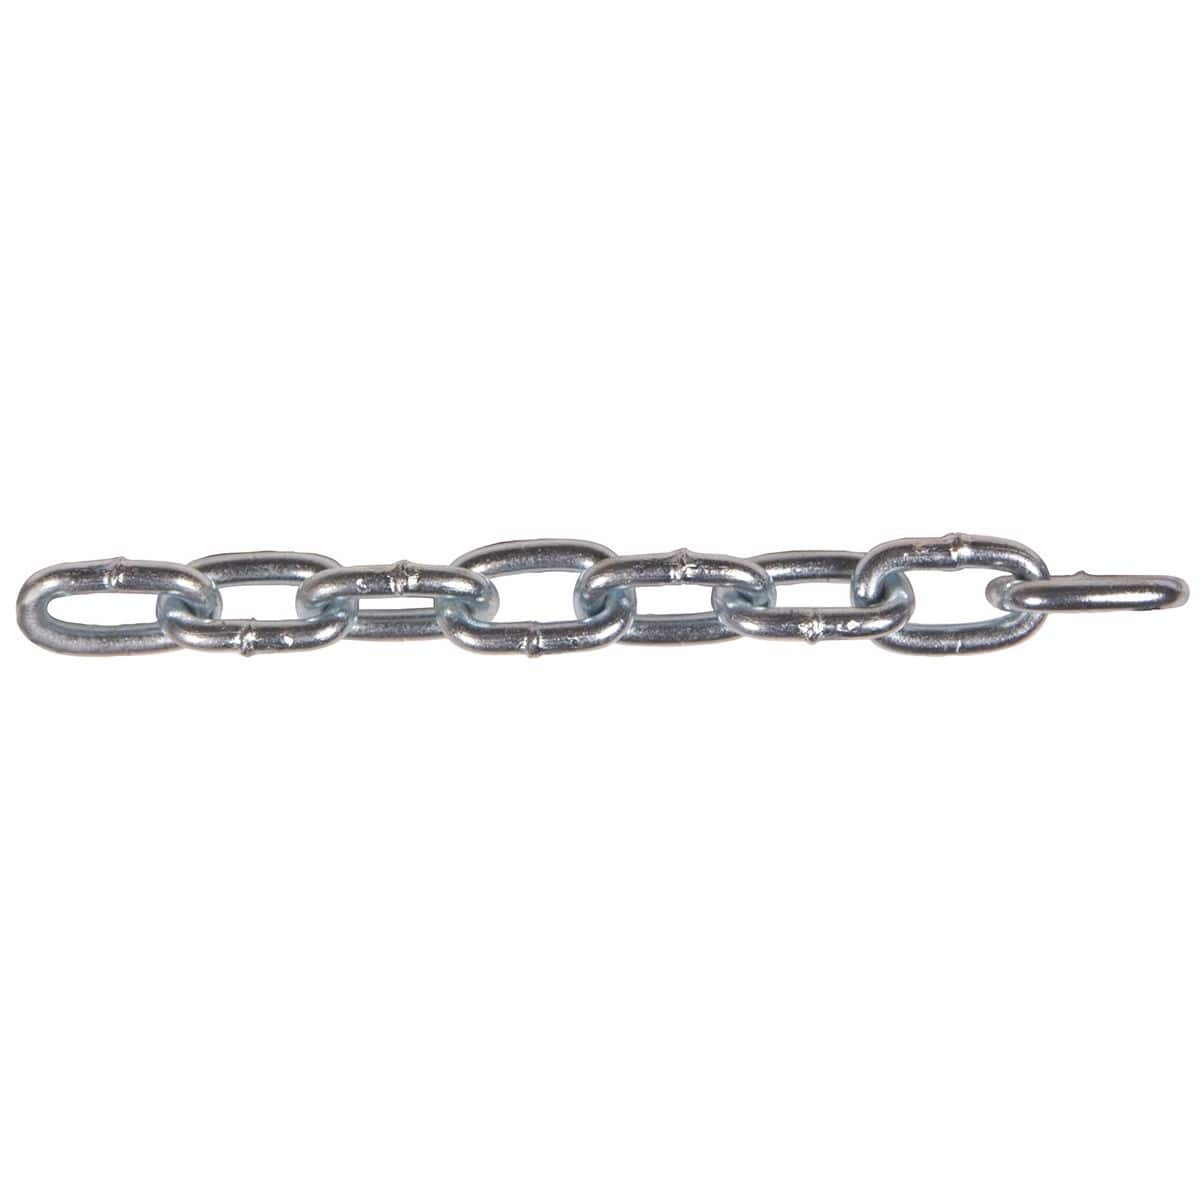 Ben-Mor #2 Machine Chain, Straight Link, Zinc-Plated, 12-ft | Canadian Tire